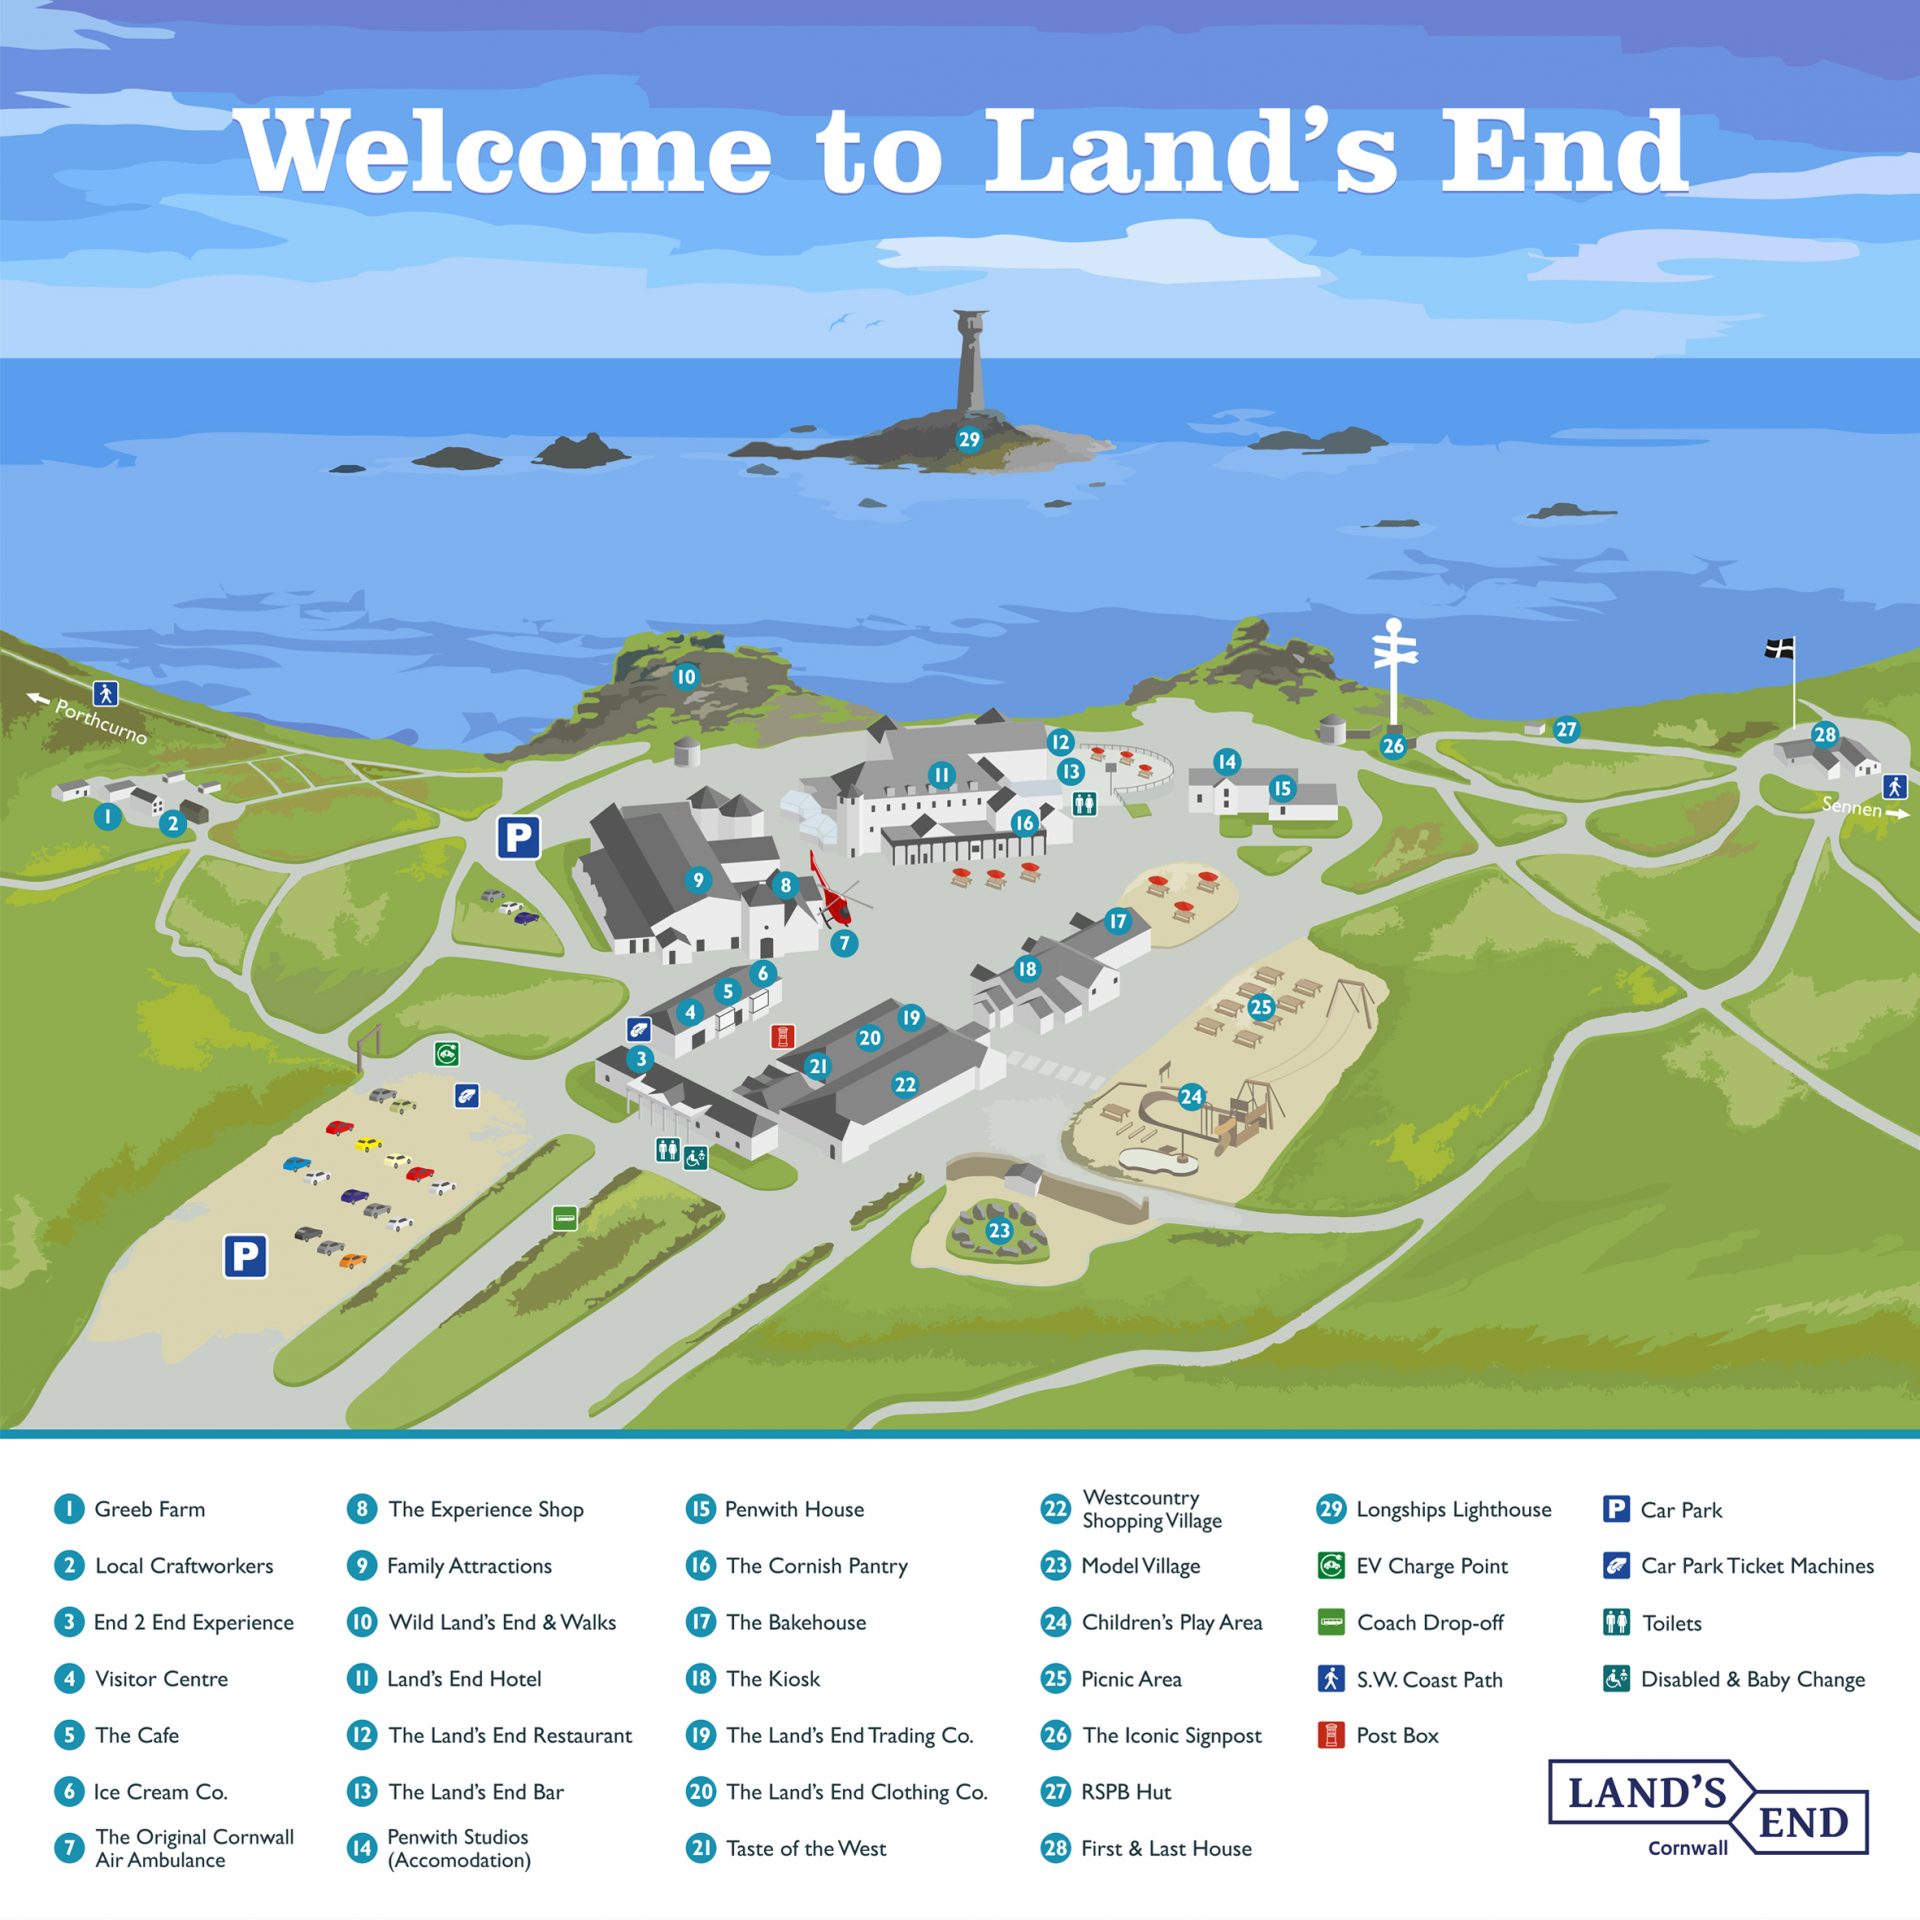 Land's End in Cornwall: history, myths, parking and facts - Cornwall Live